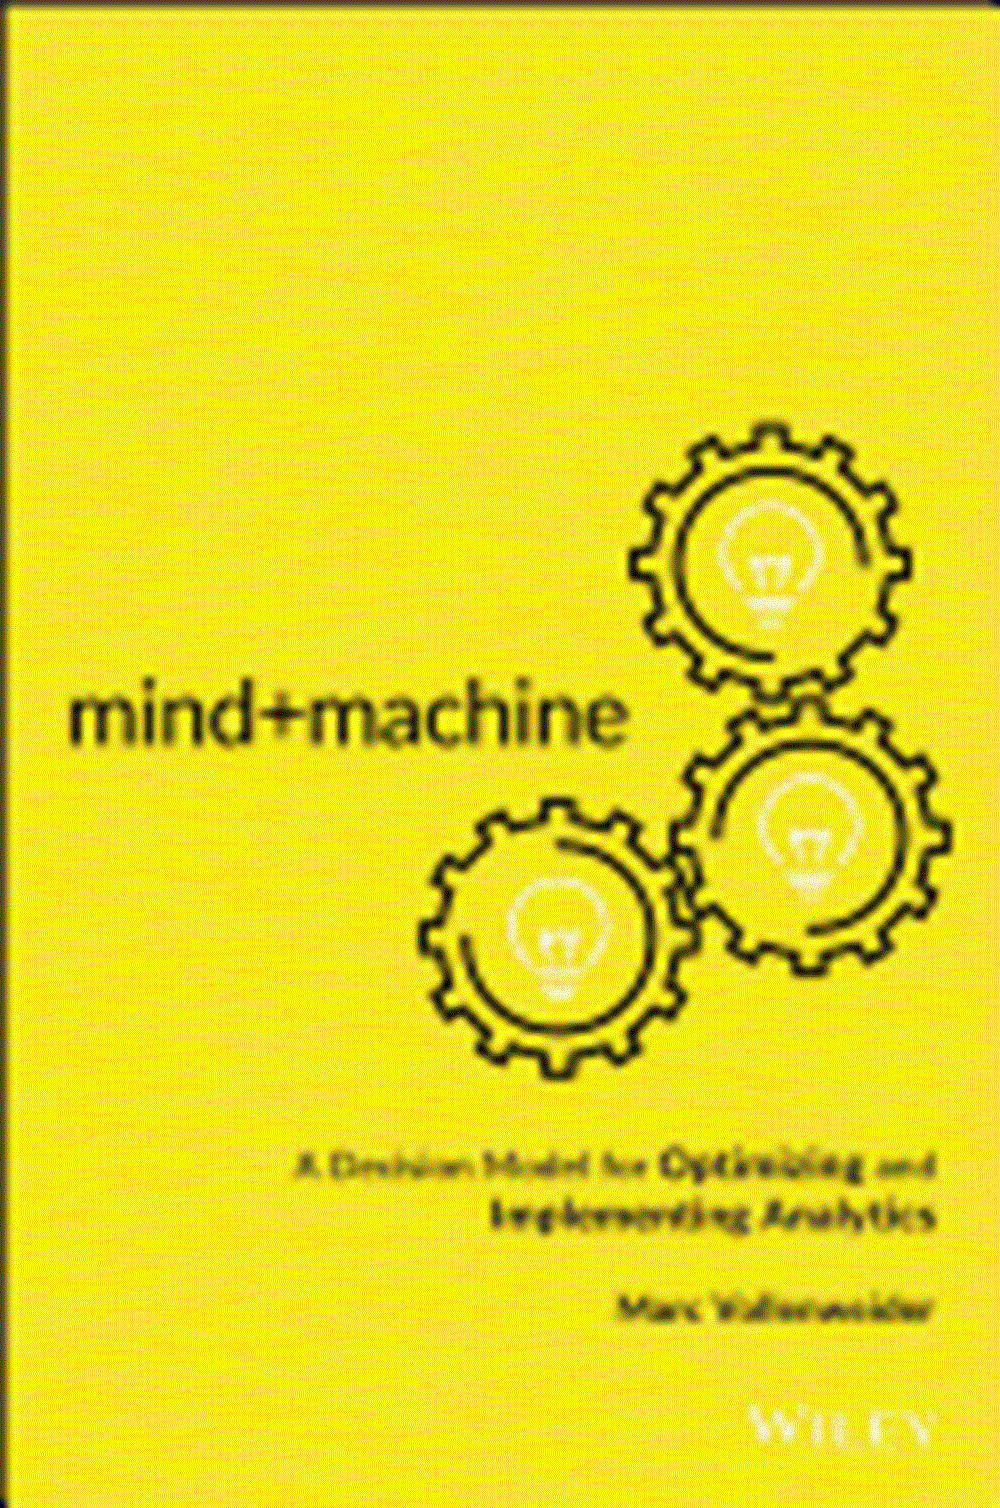 Mind+machine A Decision Model for Optimizing and Implementing Analytics